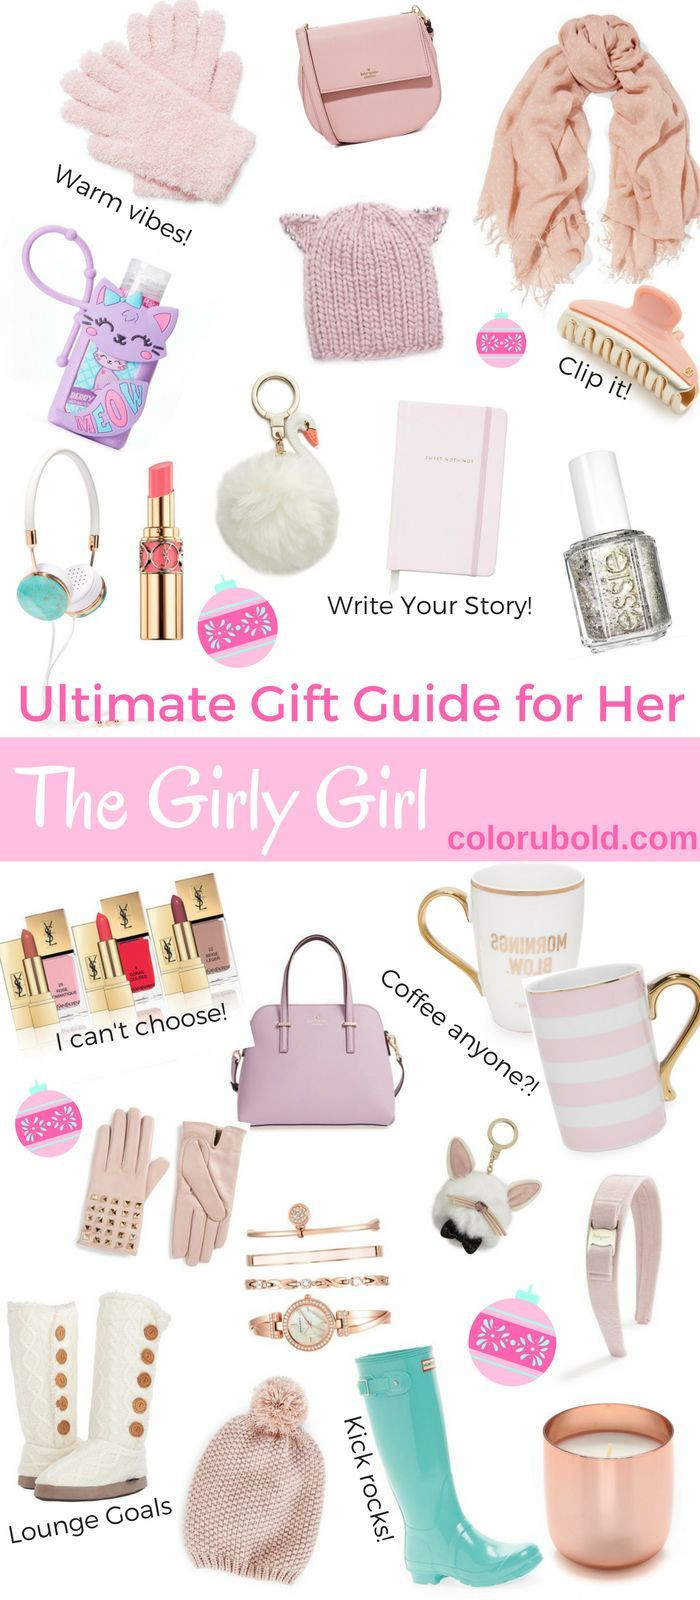 Tween Girl Birthday Gifts
 The Ultimate Gift Guide for the Girly Girl